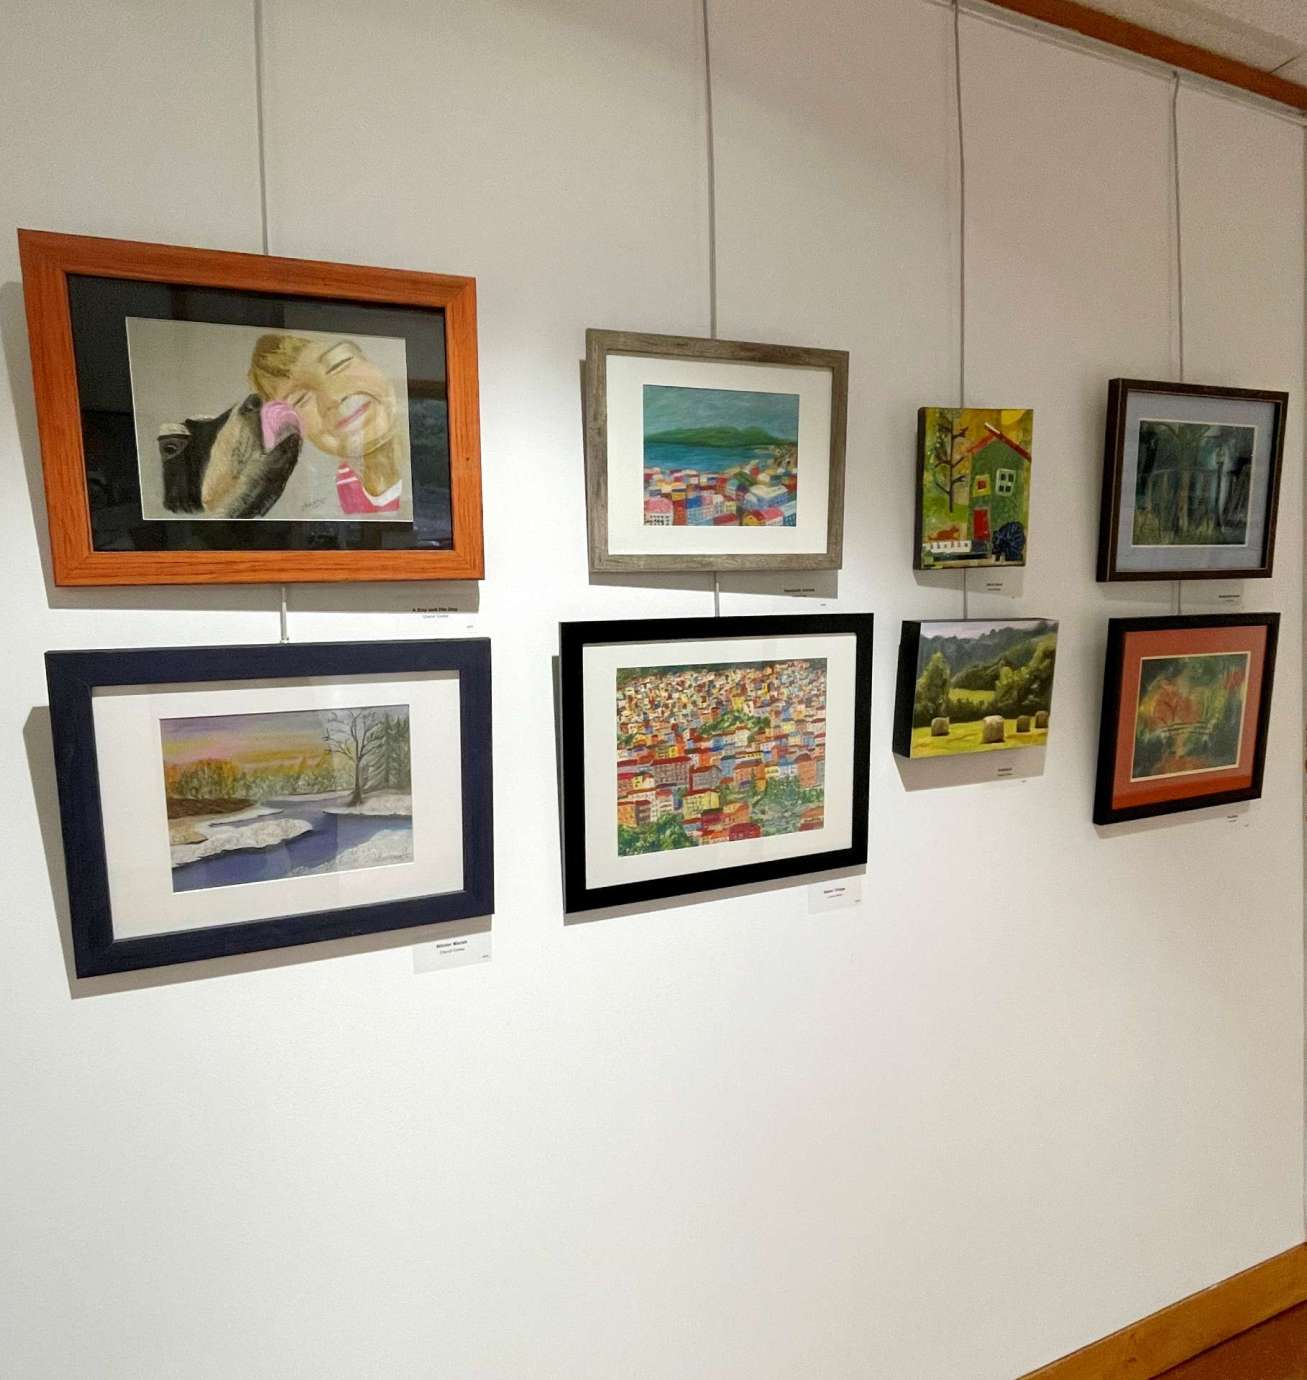 Eight framed artworks varying in medium and subject hang on a gallery wall